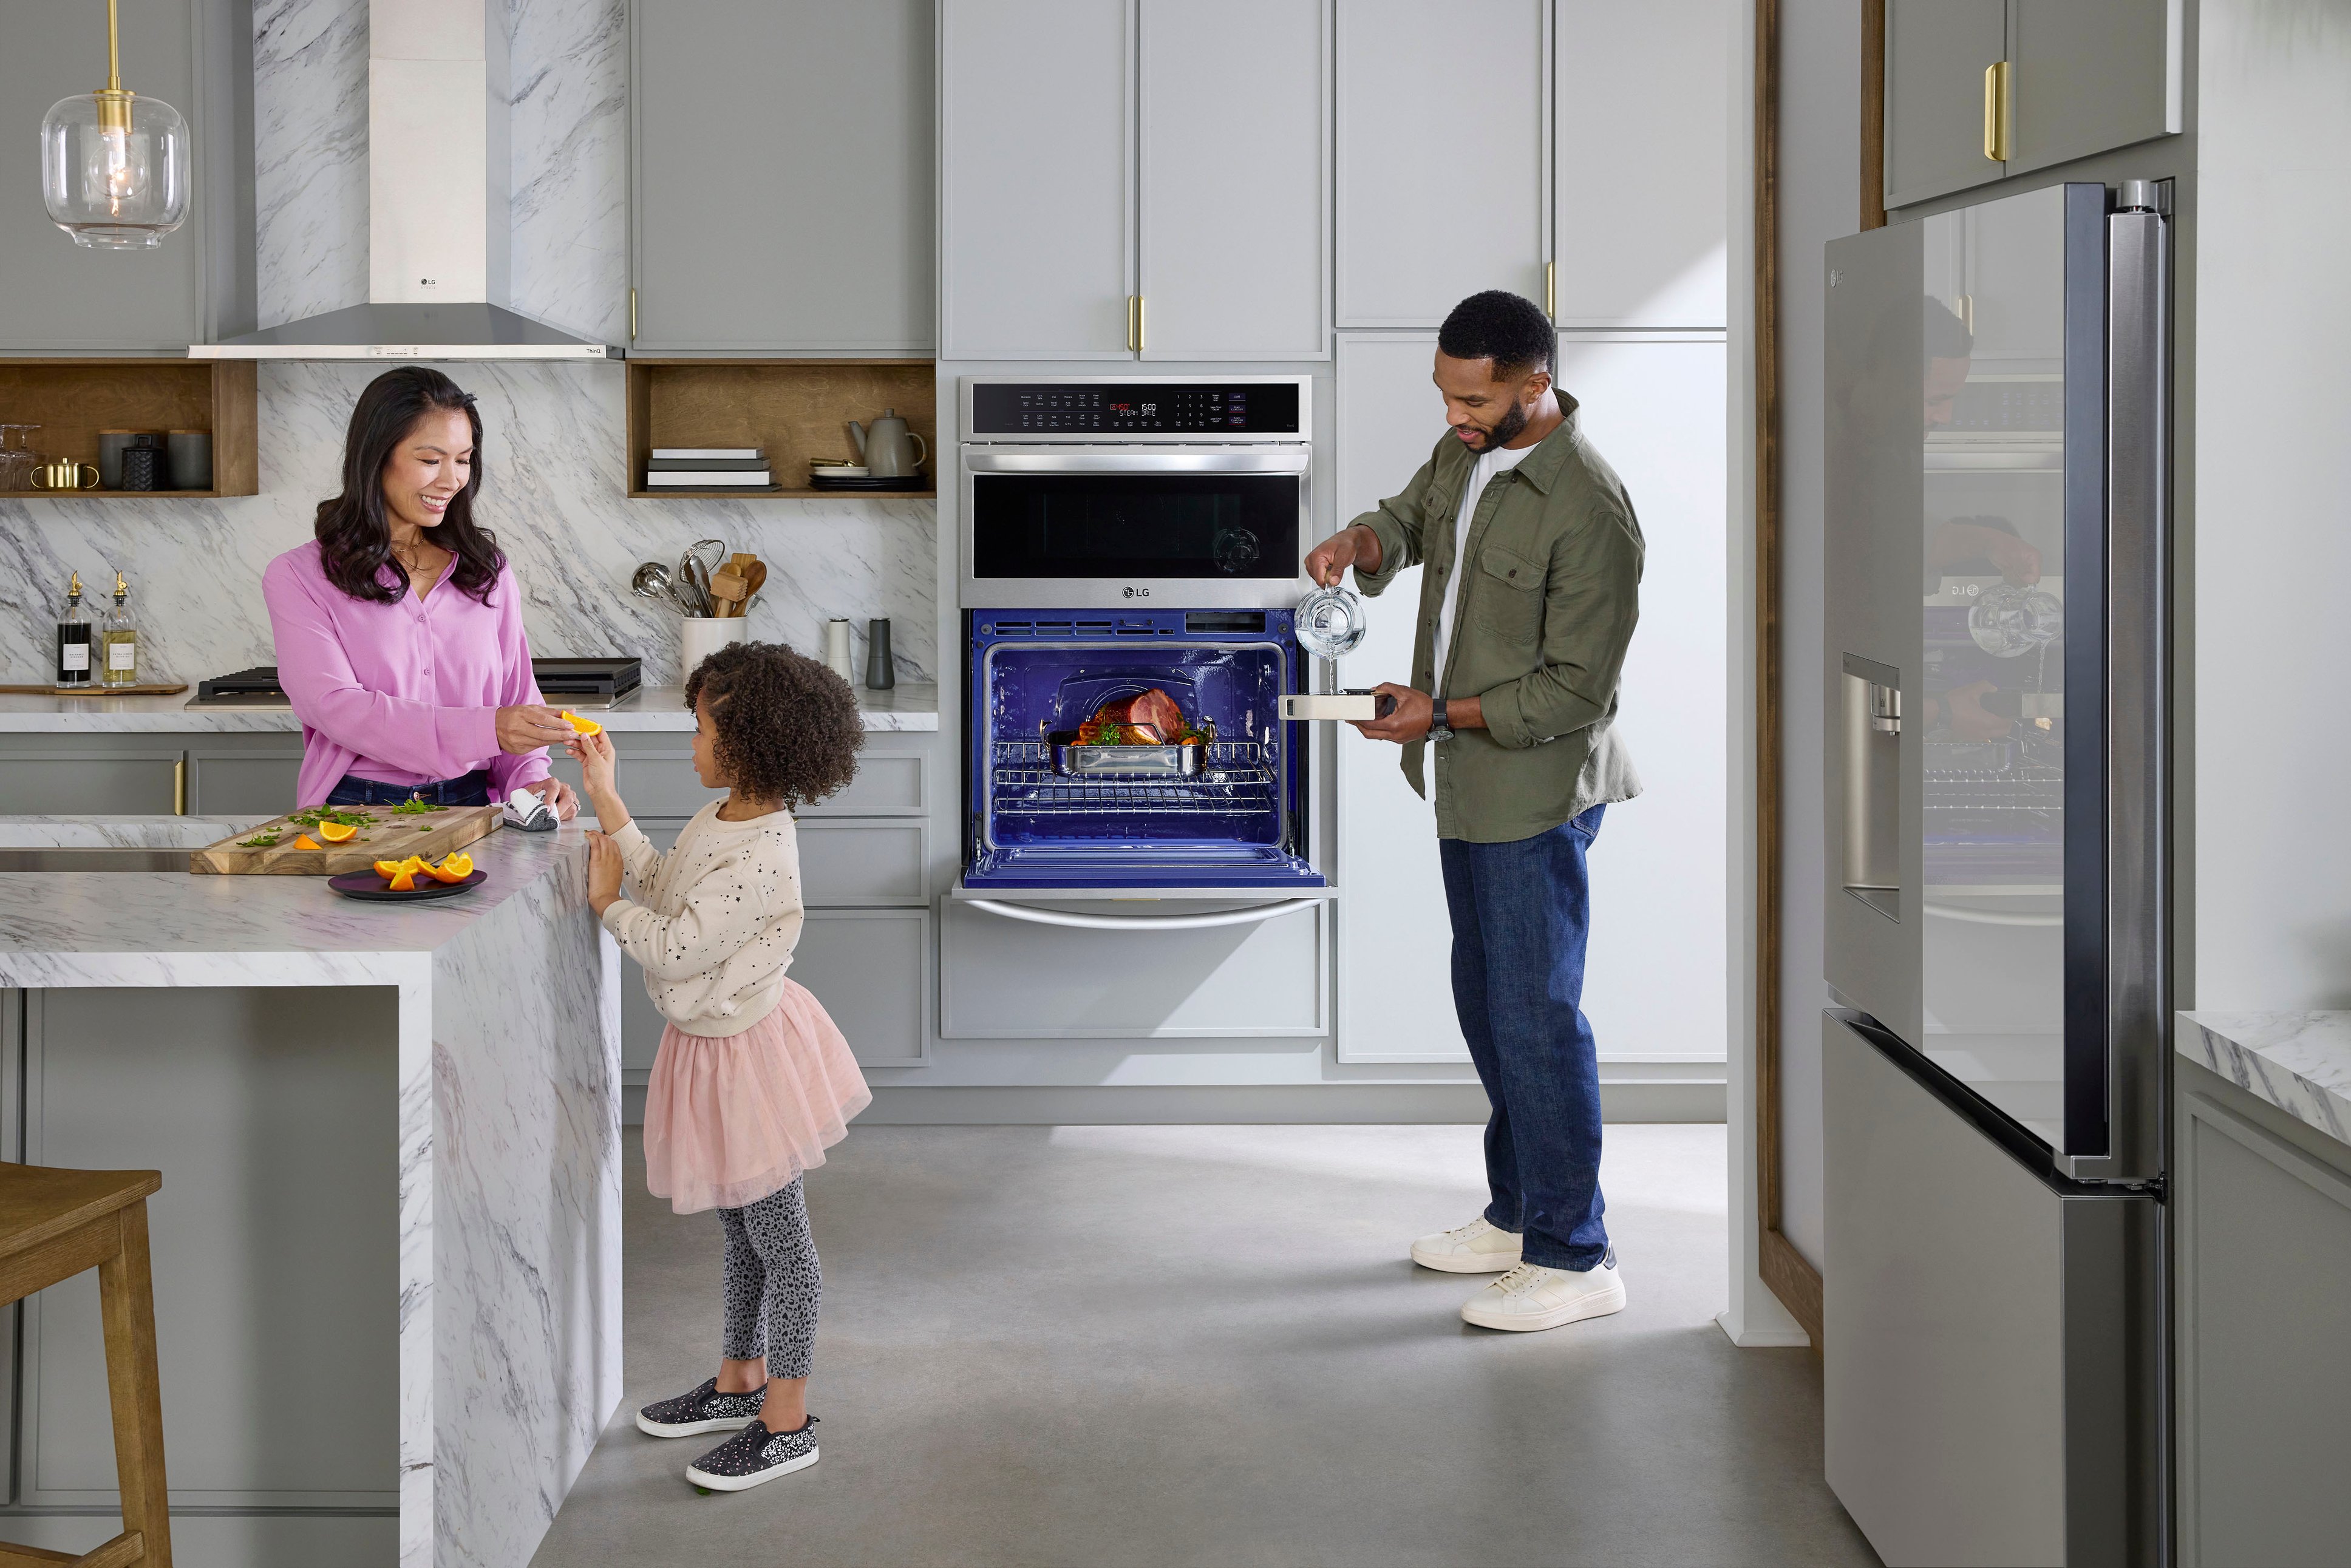 WCEP6427F by LG - 1.7/4.7 cu. ft. Smart Combination Wall Oven with  InstaView®, True Convection, Air Fry, and Steam Sous Vide